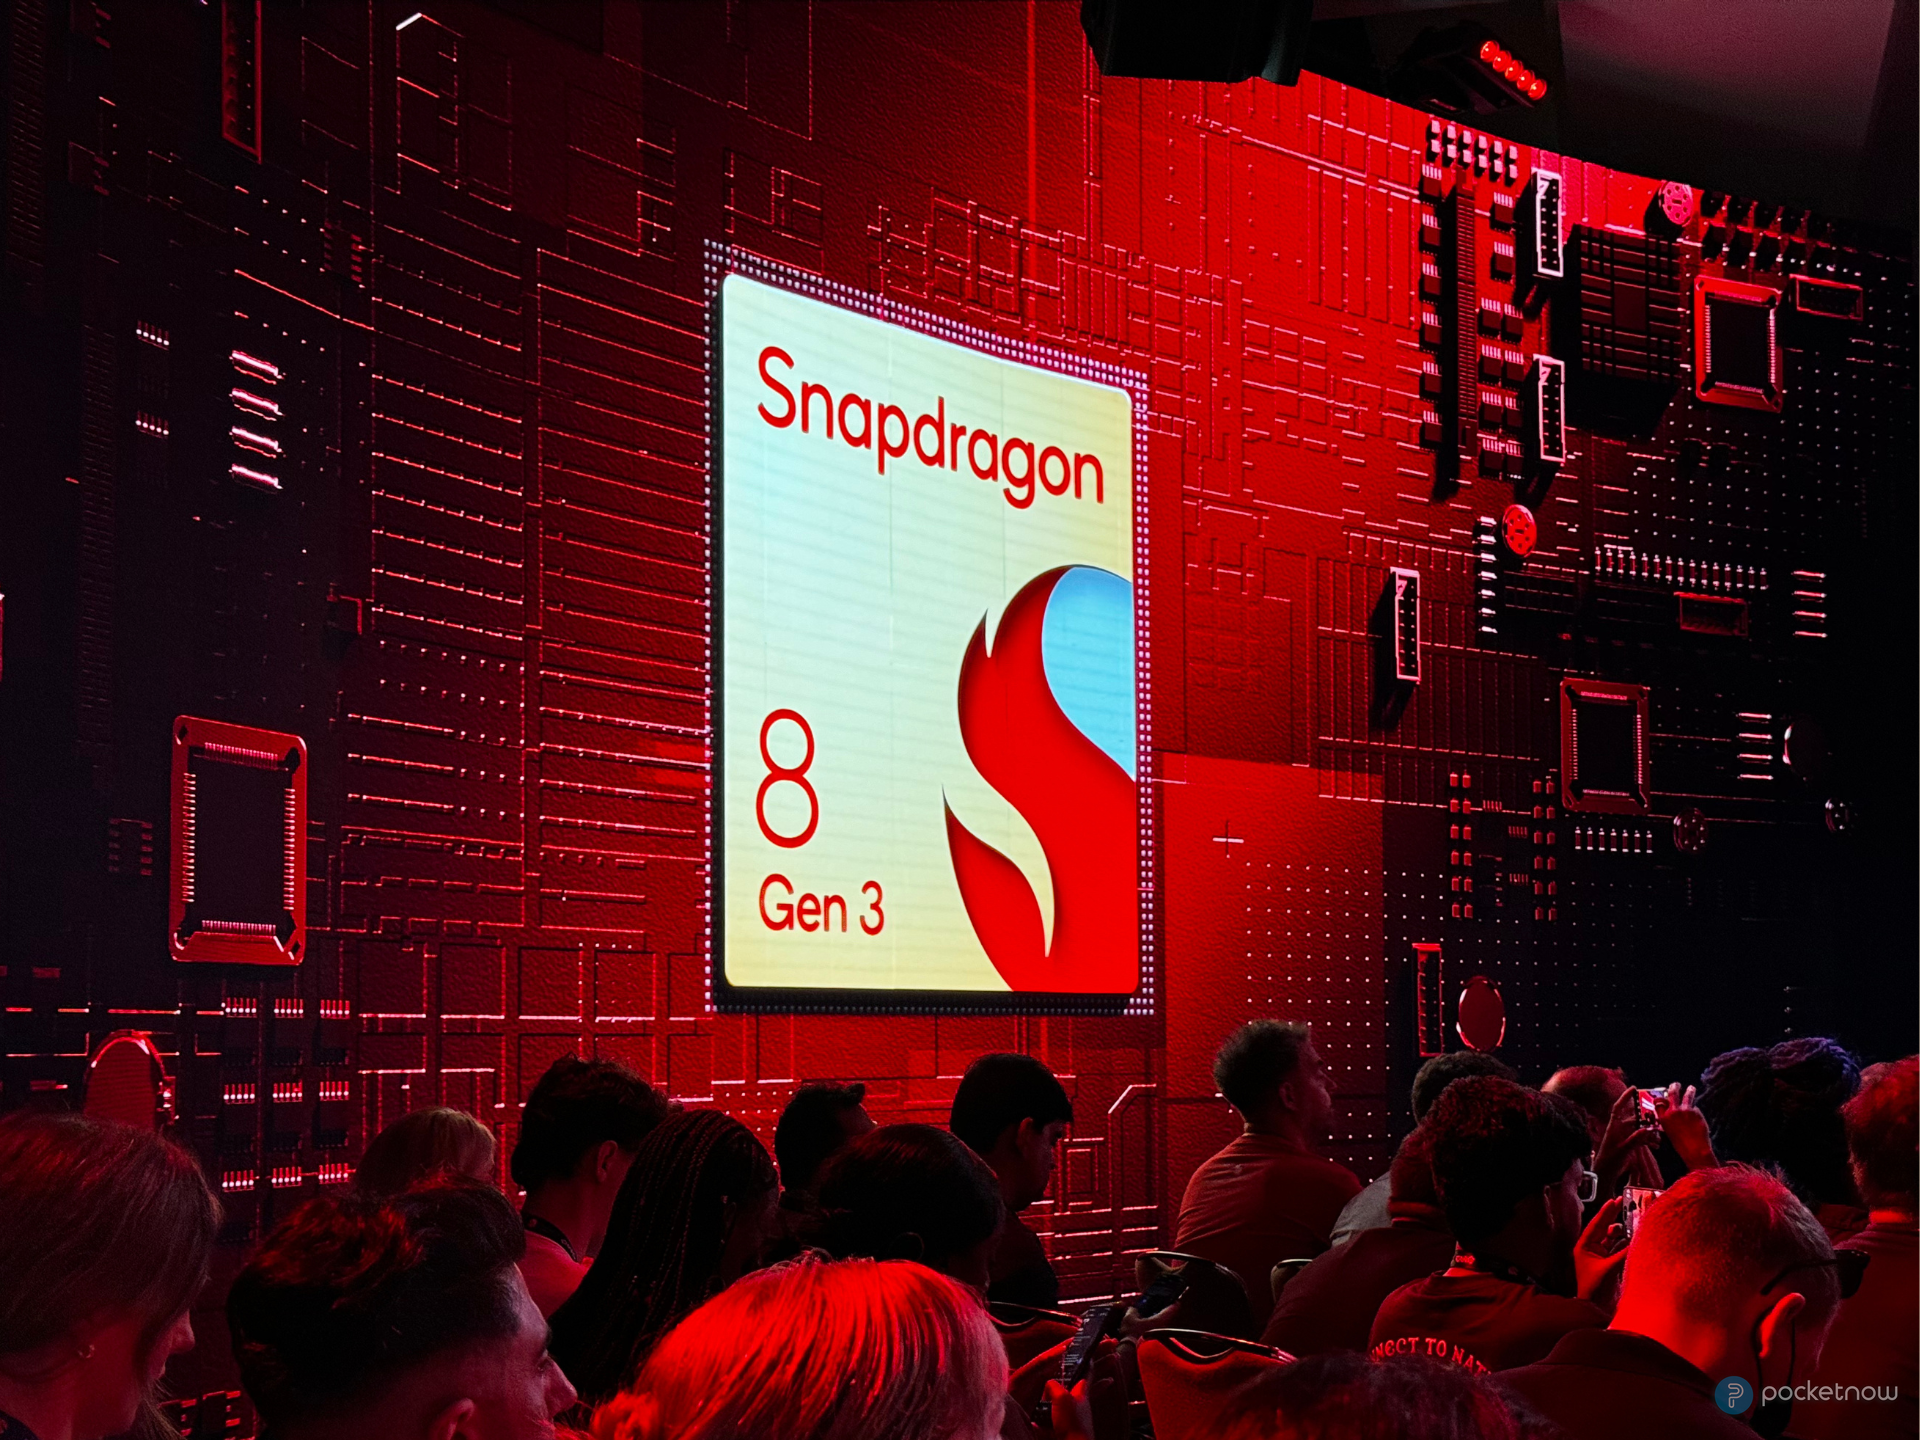 Qualcomm goes all in on AI with the launch of the Snapdragon 8 Gen 3